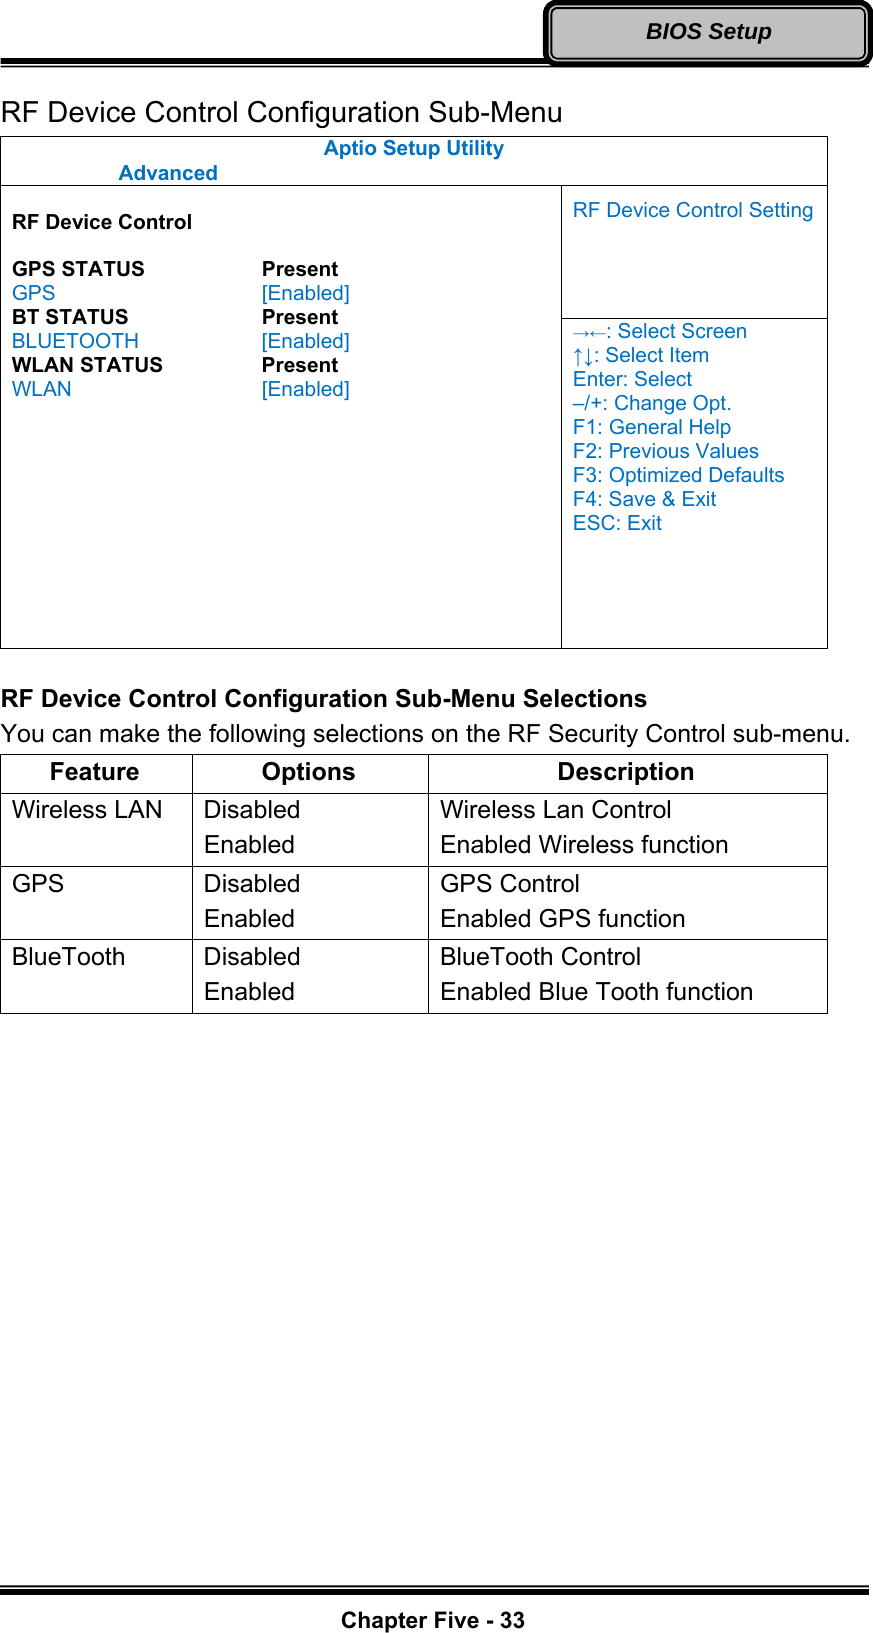   Chapter Five - 33BIOS Setup RF Device Control Configuration Sub-Menu Aptio Setup Utility  Advanced  RF Device Control Setting  RF Device Control  GPS STATUS   Present GPS     [Enabled] BT STATUS   Present BLUETOOTH   [Enabled] WLAN STATUS    Present WLAN    [Enabled] →←: Select Screen ↑↓: Select Item Enter: Select –/+: Change Opt. F1: General Help F2: Previous Values F3: Optimized Defaults F4: Save &amp; Exit ESC: Exit  RF Device Control Configuration Sub-Menu Selections You can make the following selections on the RF Security Control sub-menu.   Feature Options  Description Wireless LAN  Disabled Enabled Wireless Lan Control Enabled Wireless function GPS Disabled Enabled GPS Control Enabled GPS function BlueTooth Disabled Enabled BlueTooth Control Enabled Blue Tooth function 